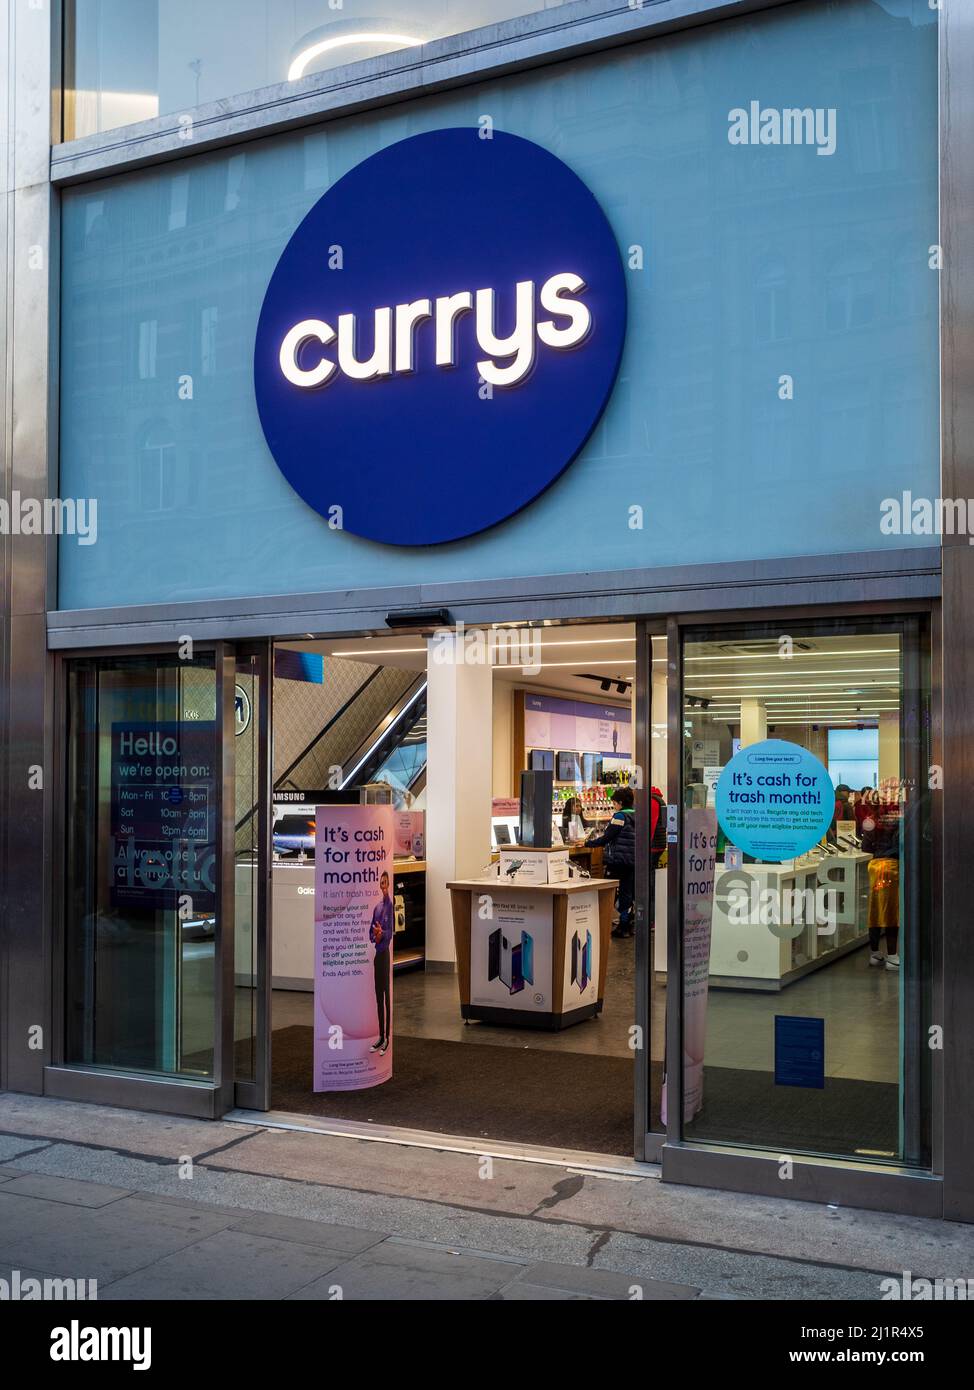 Currys Store London - Currys Electrical Retailer Shop in Central London. Stockfoto